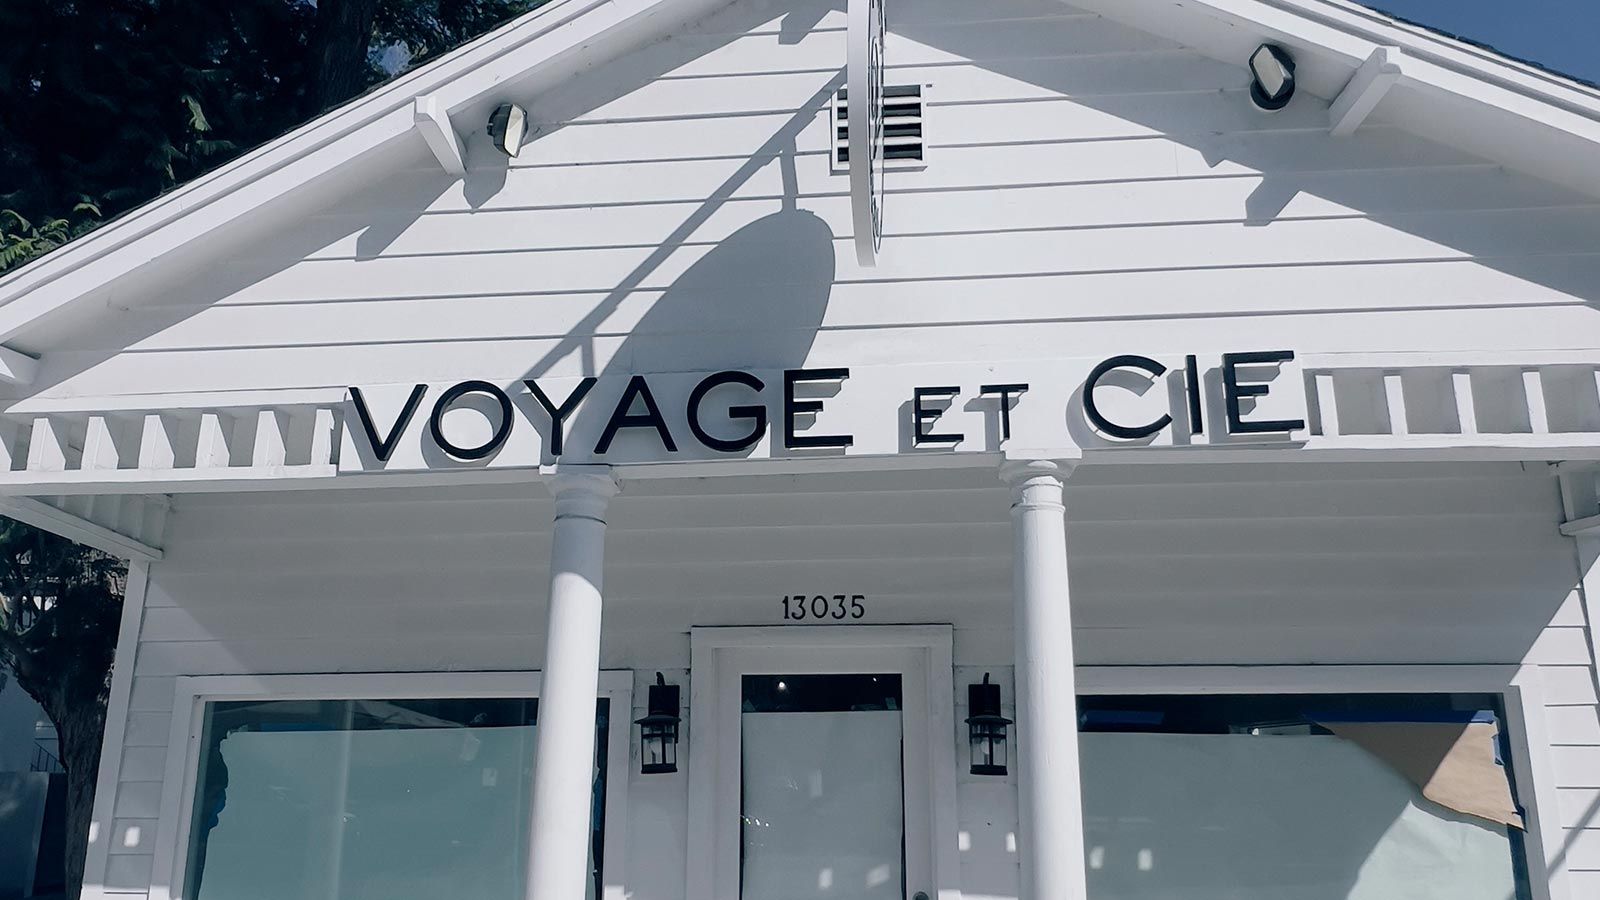 Voyage et Cie 3D sign mounted on the storefront